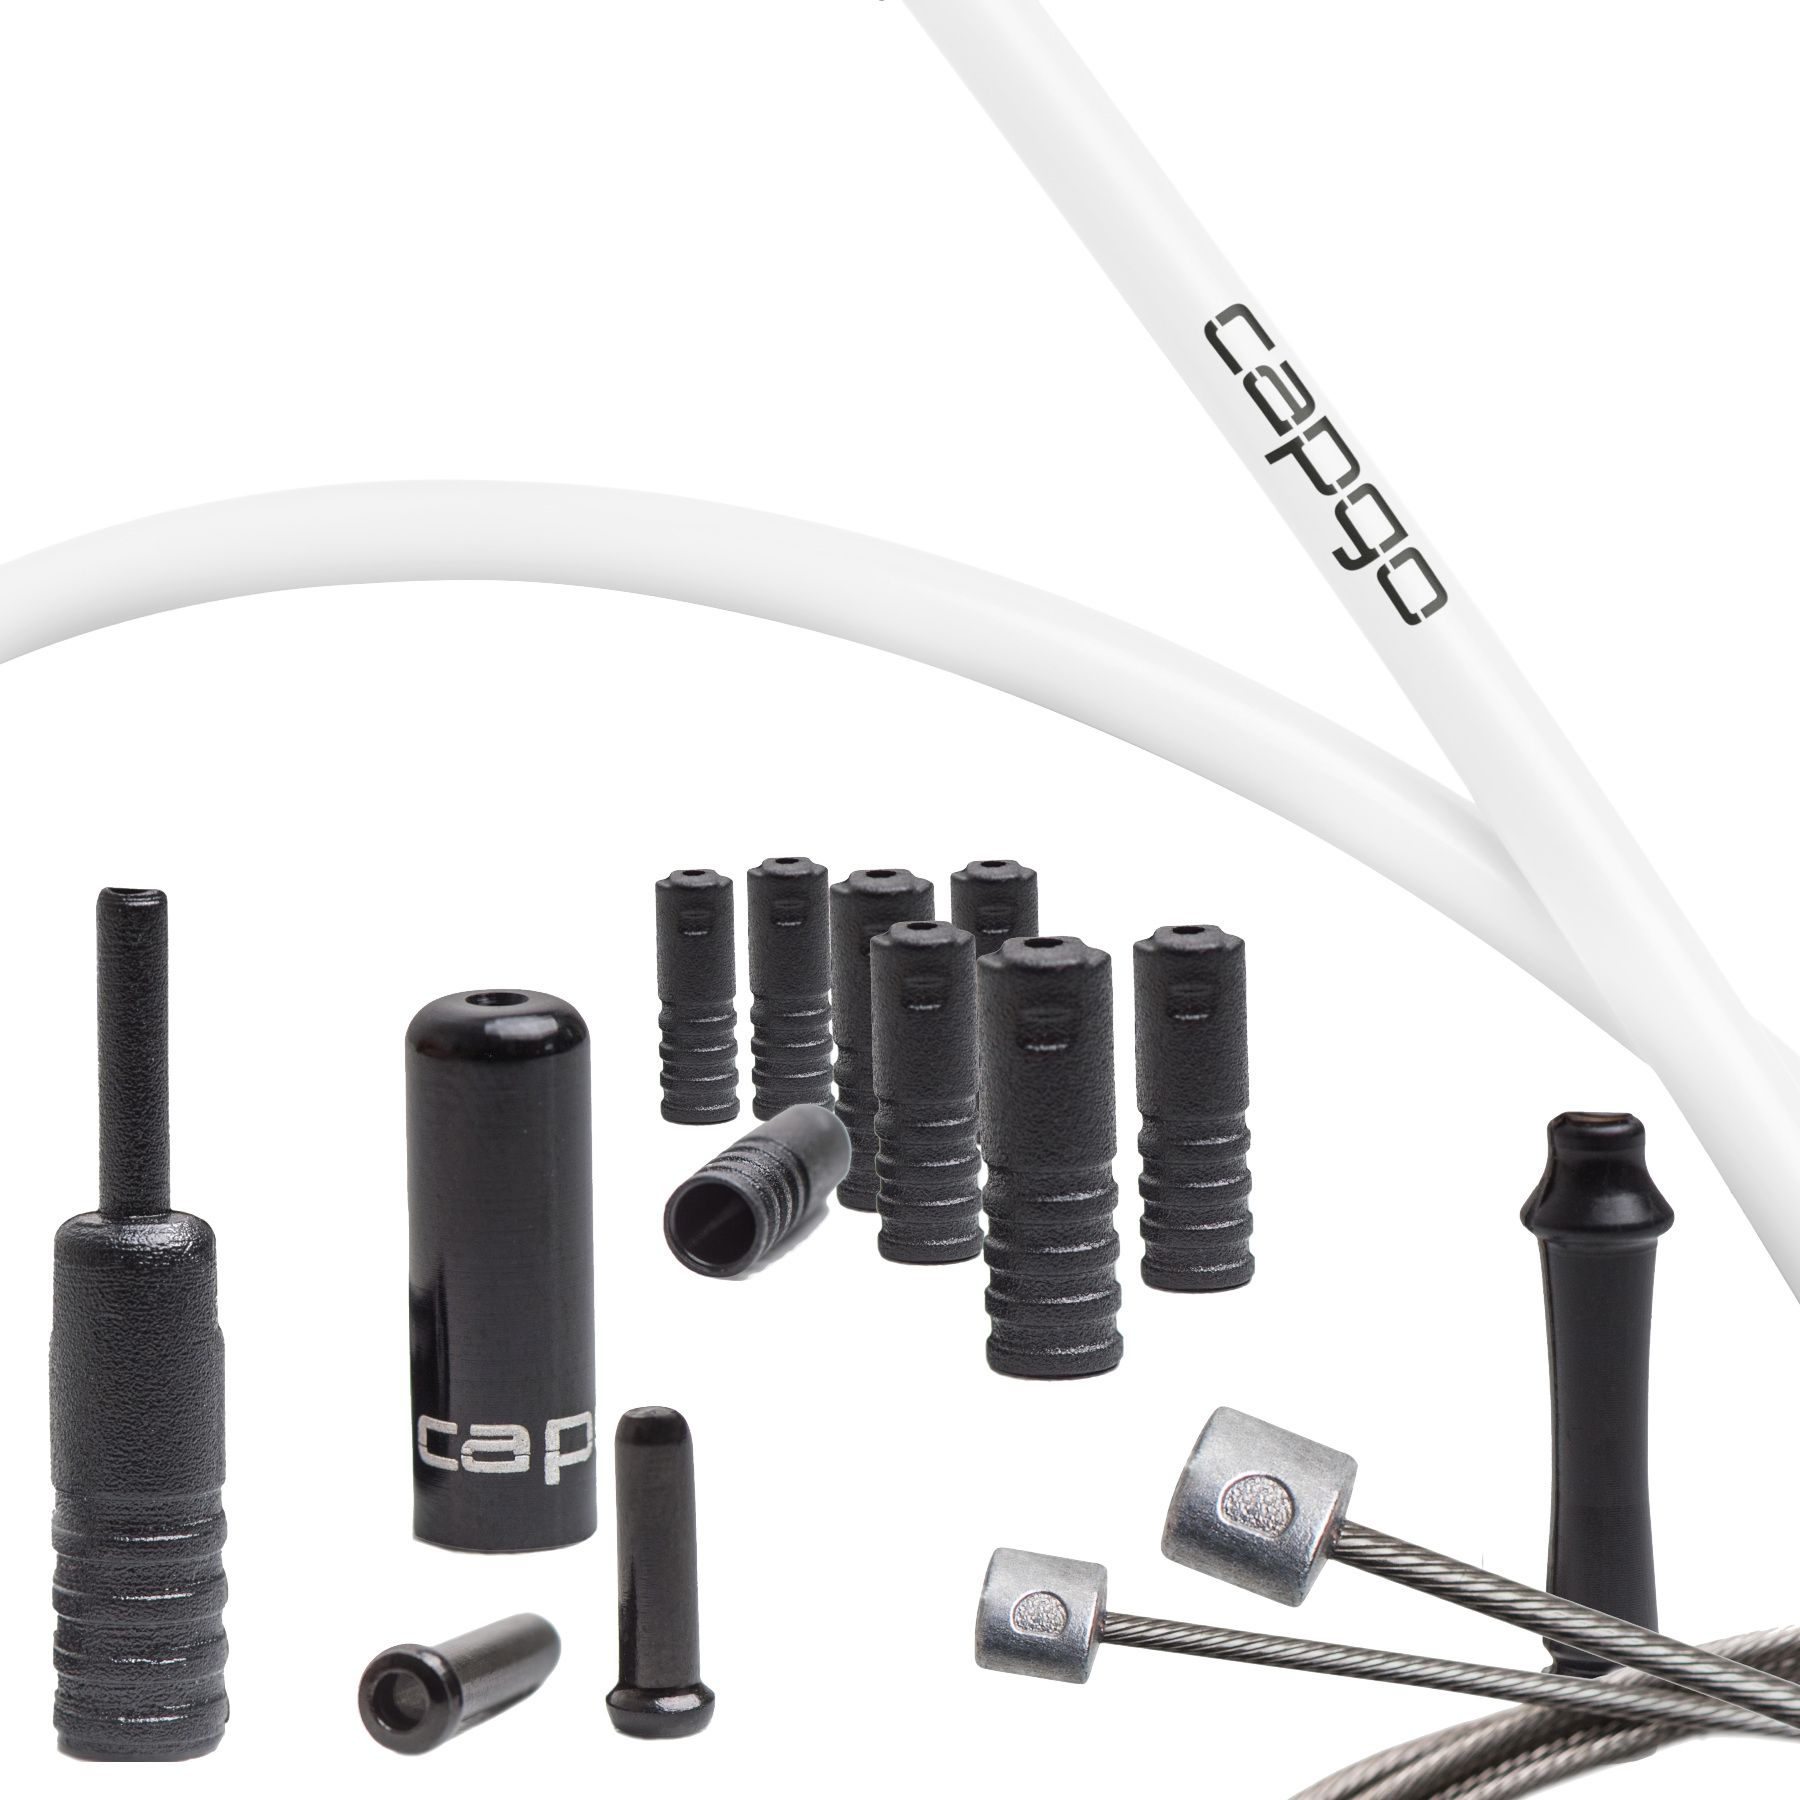 Image of capgo Blue Line Shift Cable Set - long - Stainless Steel - PTFE - Shimano/SRAM - white